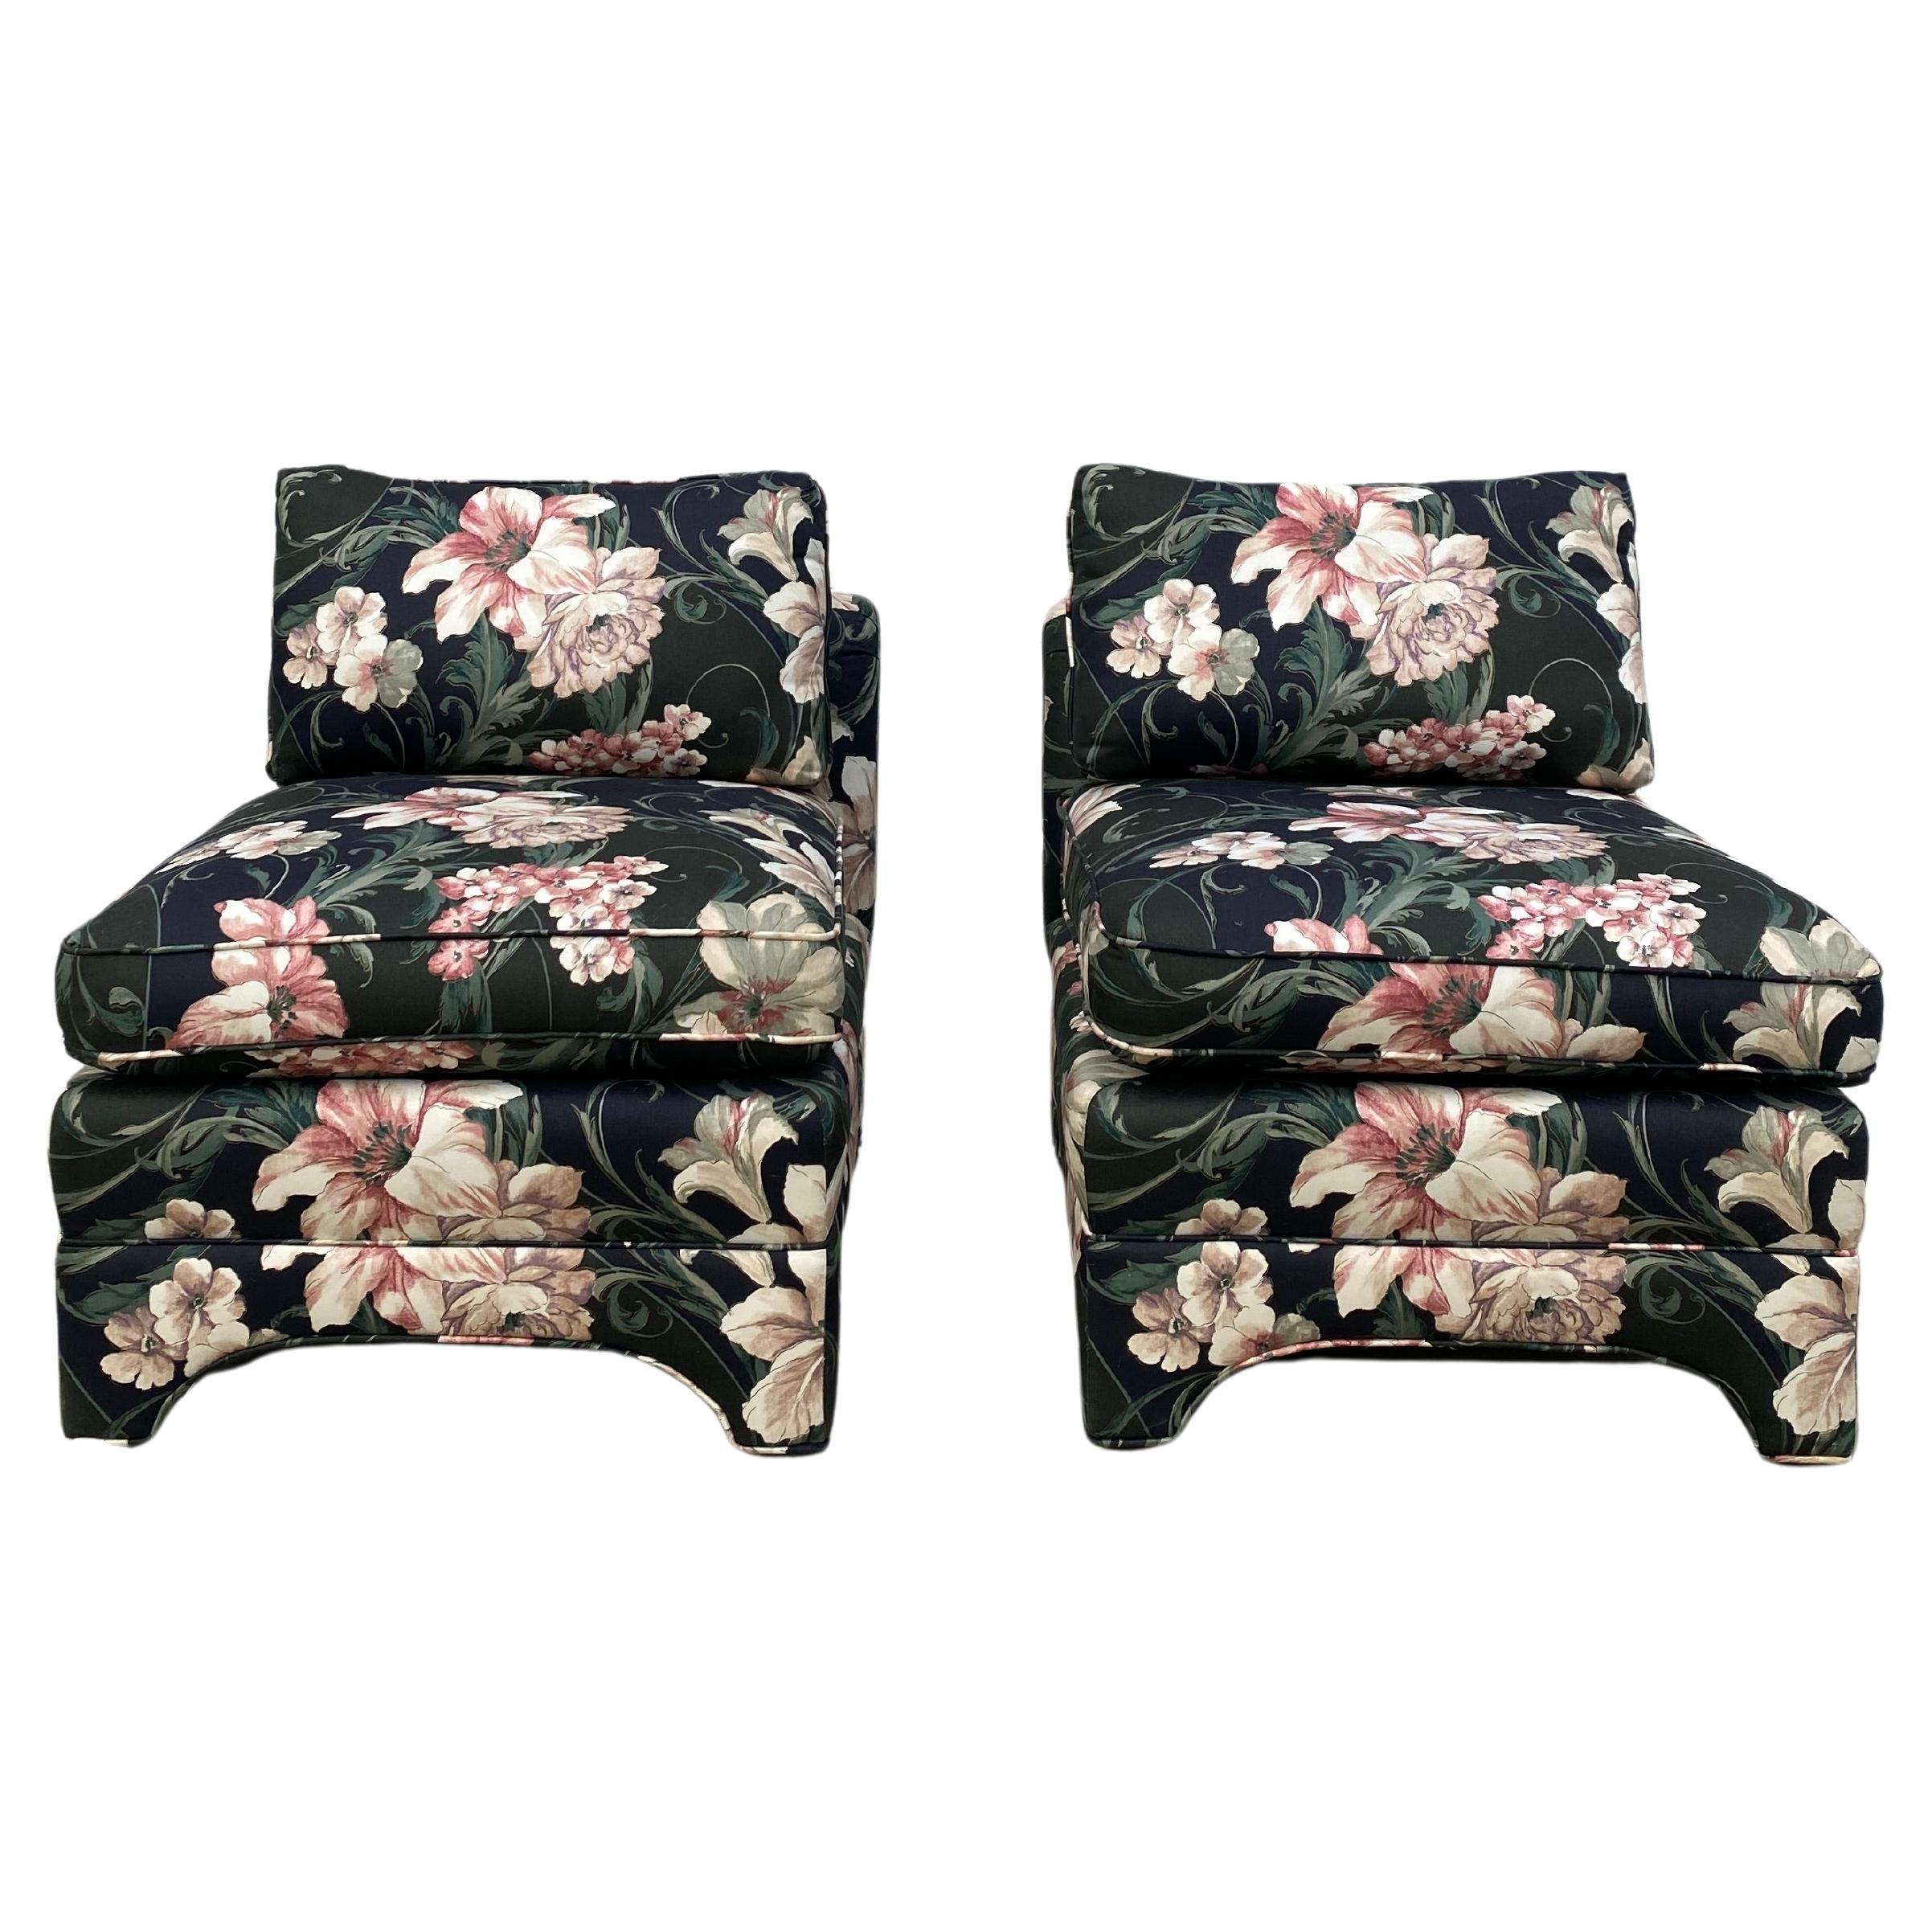 Pair of Century Lounge Chairs in Floral Print